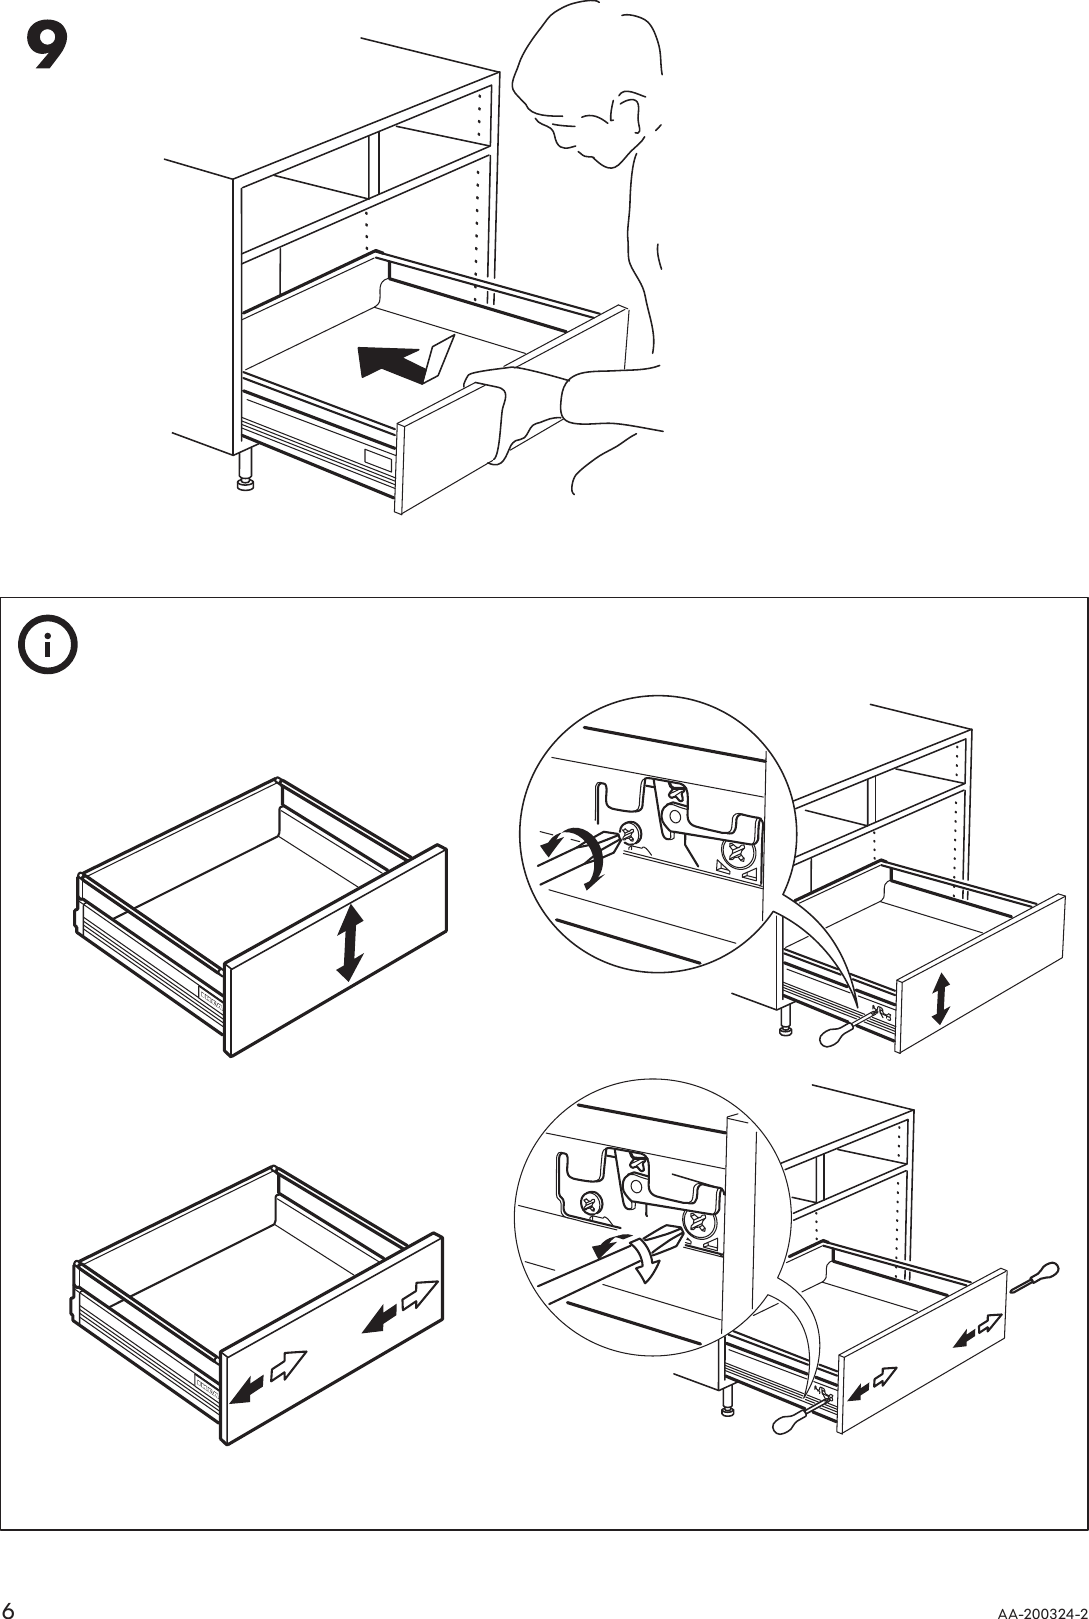 ikea rationell drawer assembly instructions understandingaspaladin